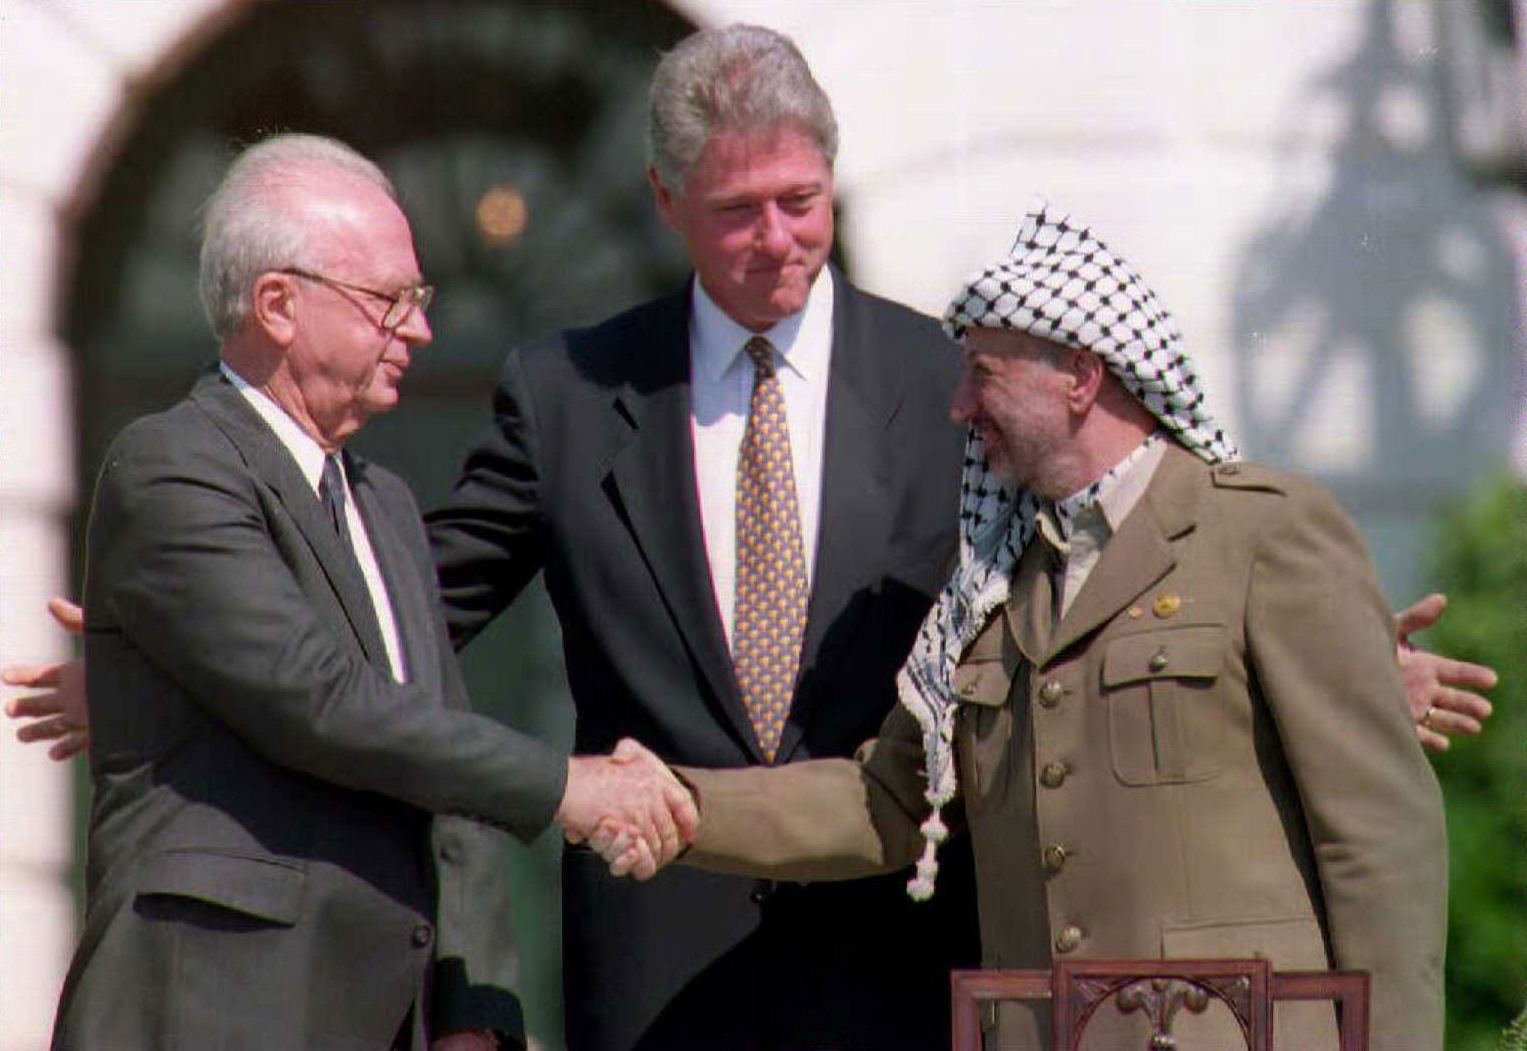 U.S. President Bill Clinton (C) stands between PLO leader Yasser Arafat (R) and Israeli Prime Minister Yitzahk Rabin (L) as they shake hands at the White House in Washington D.C. on Sept. 13, 1993.